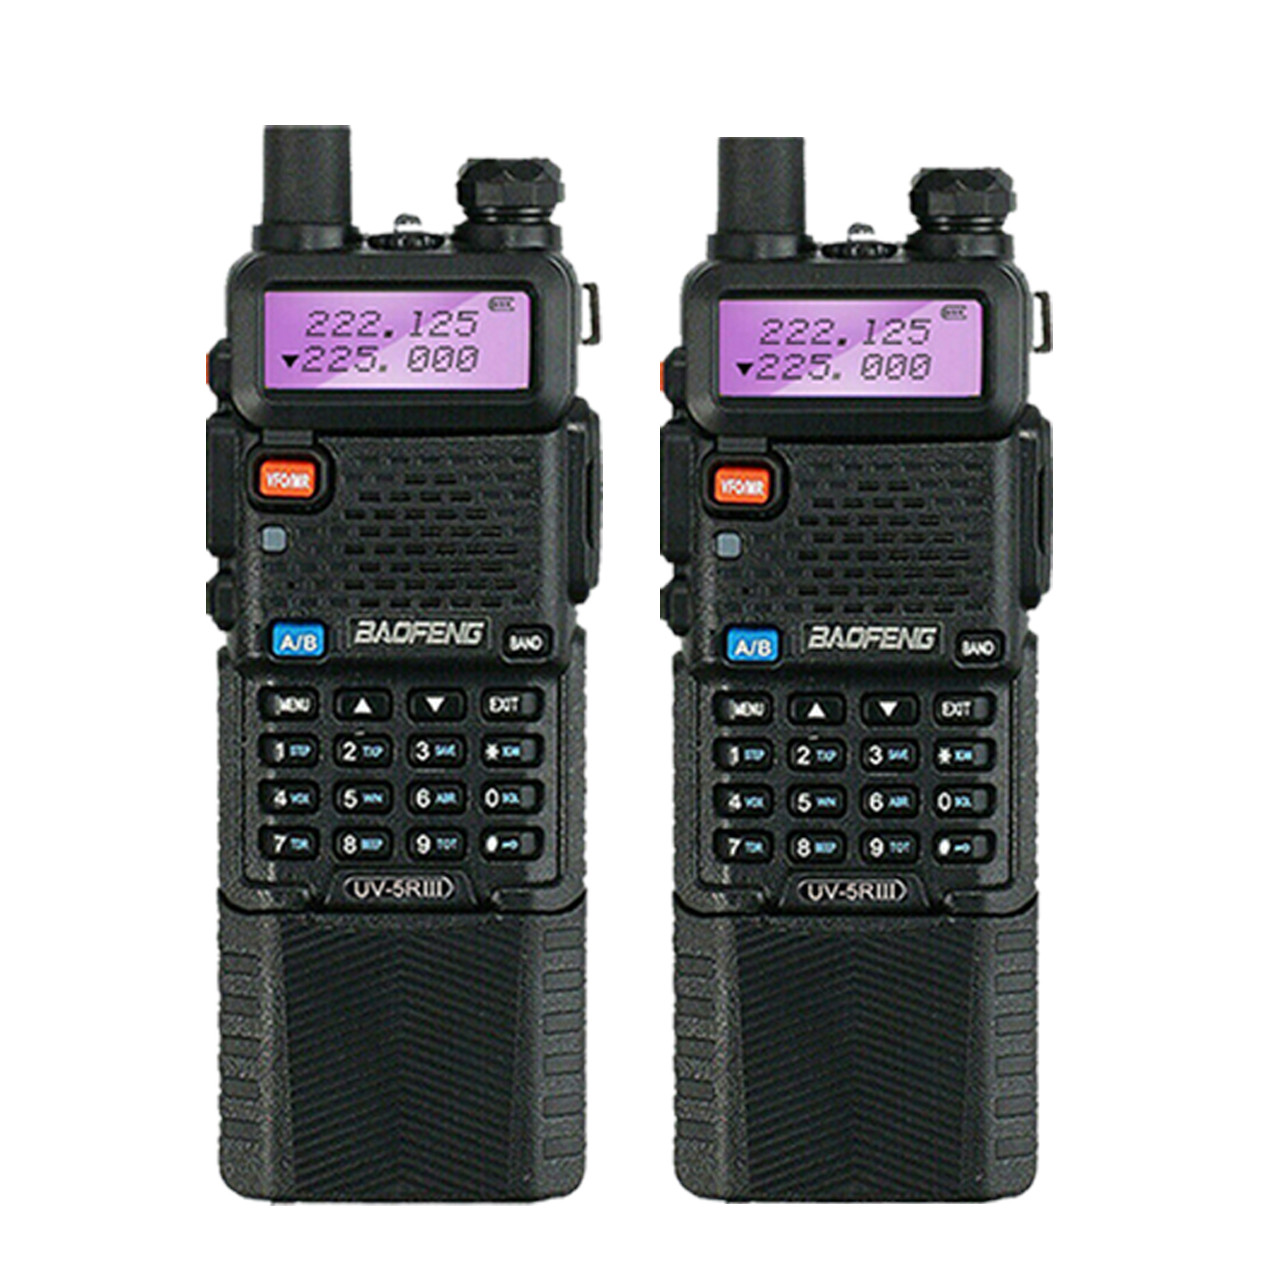 BAOFENG UV-5R 8W Ham Radio Handheld Dual Band 2-Way with an Extra 3800mAh Battery with BAOFENG Hand Mic and Programming Cable - 4